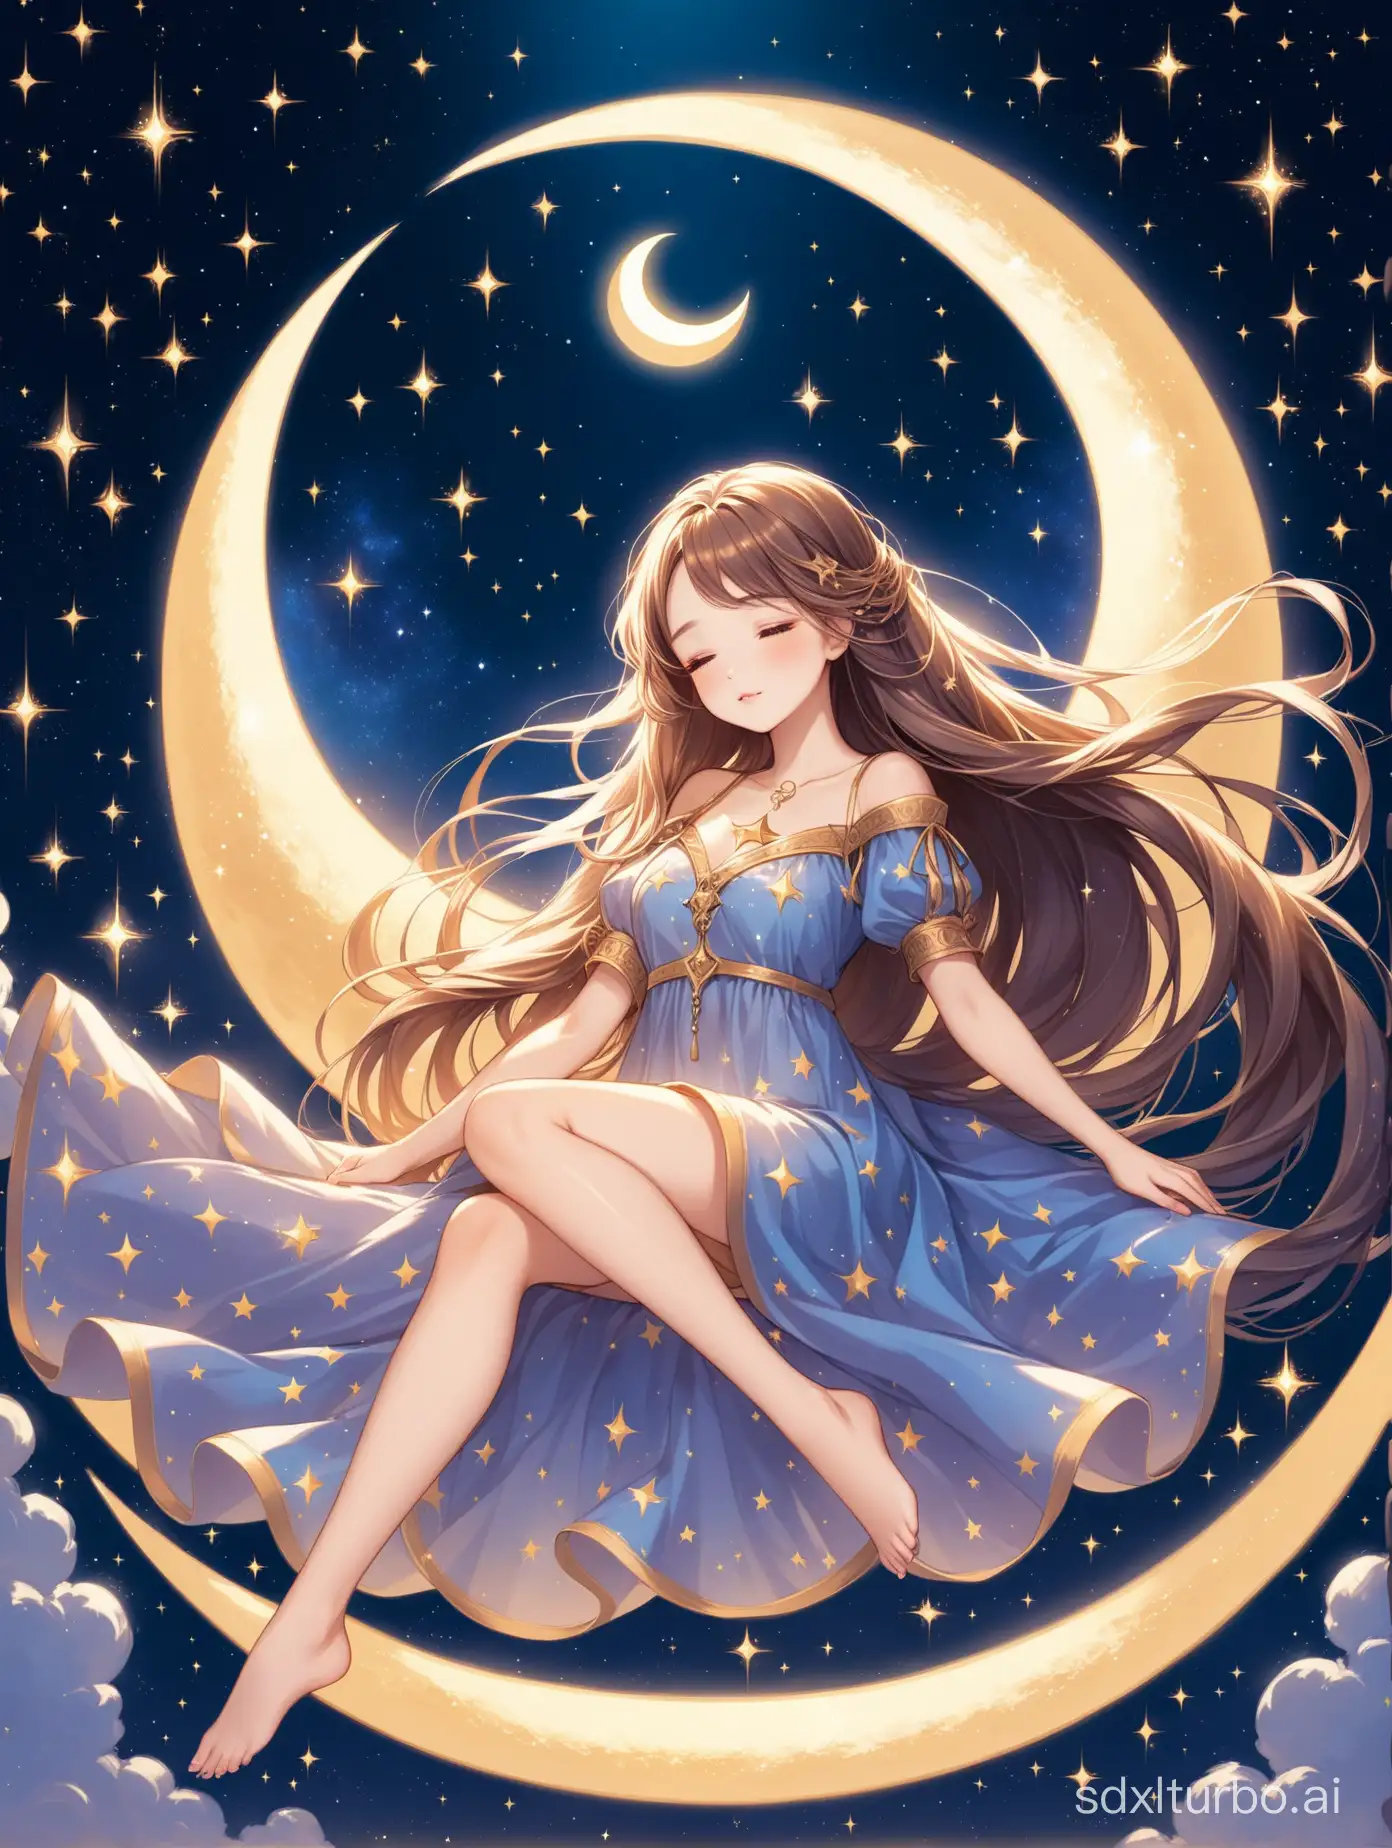 Ethereal-Beauty-Serene-Girl-Resting-on-Crescent-Moon